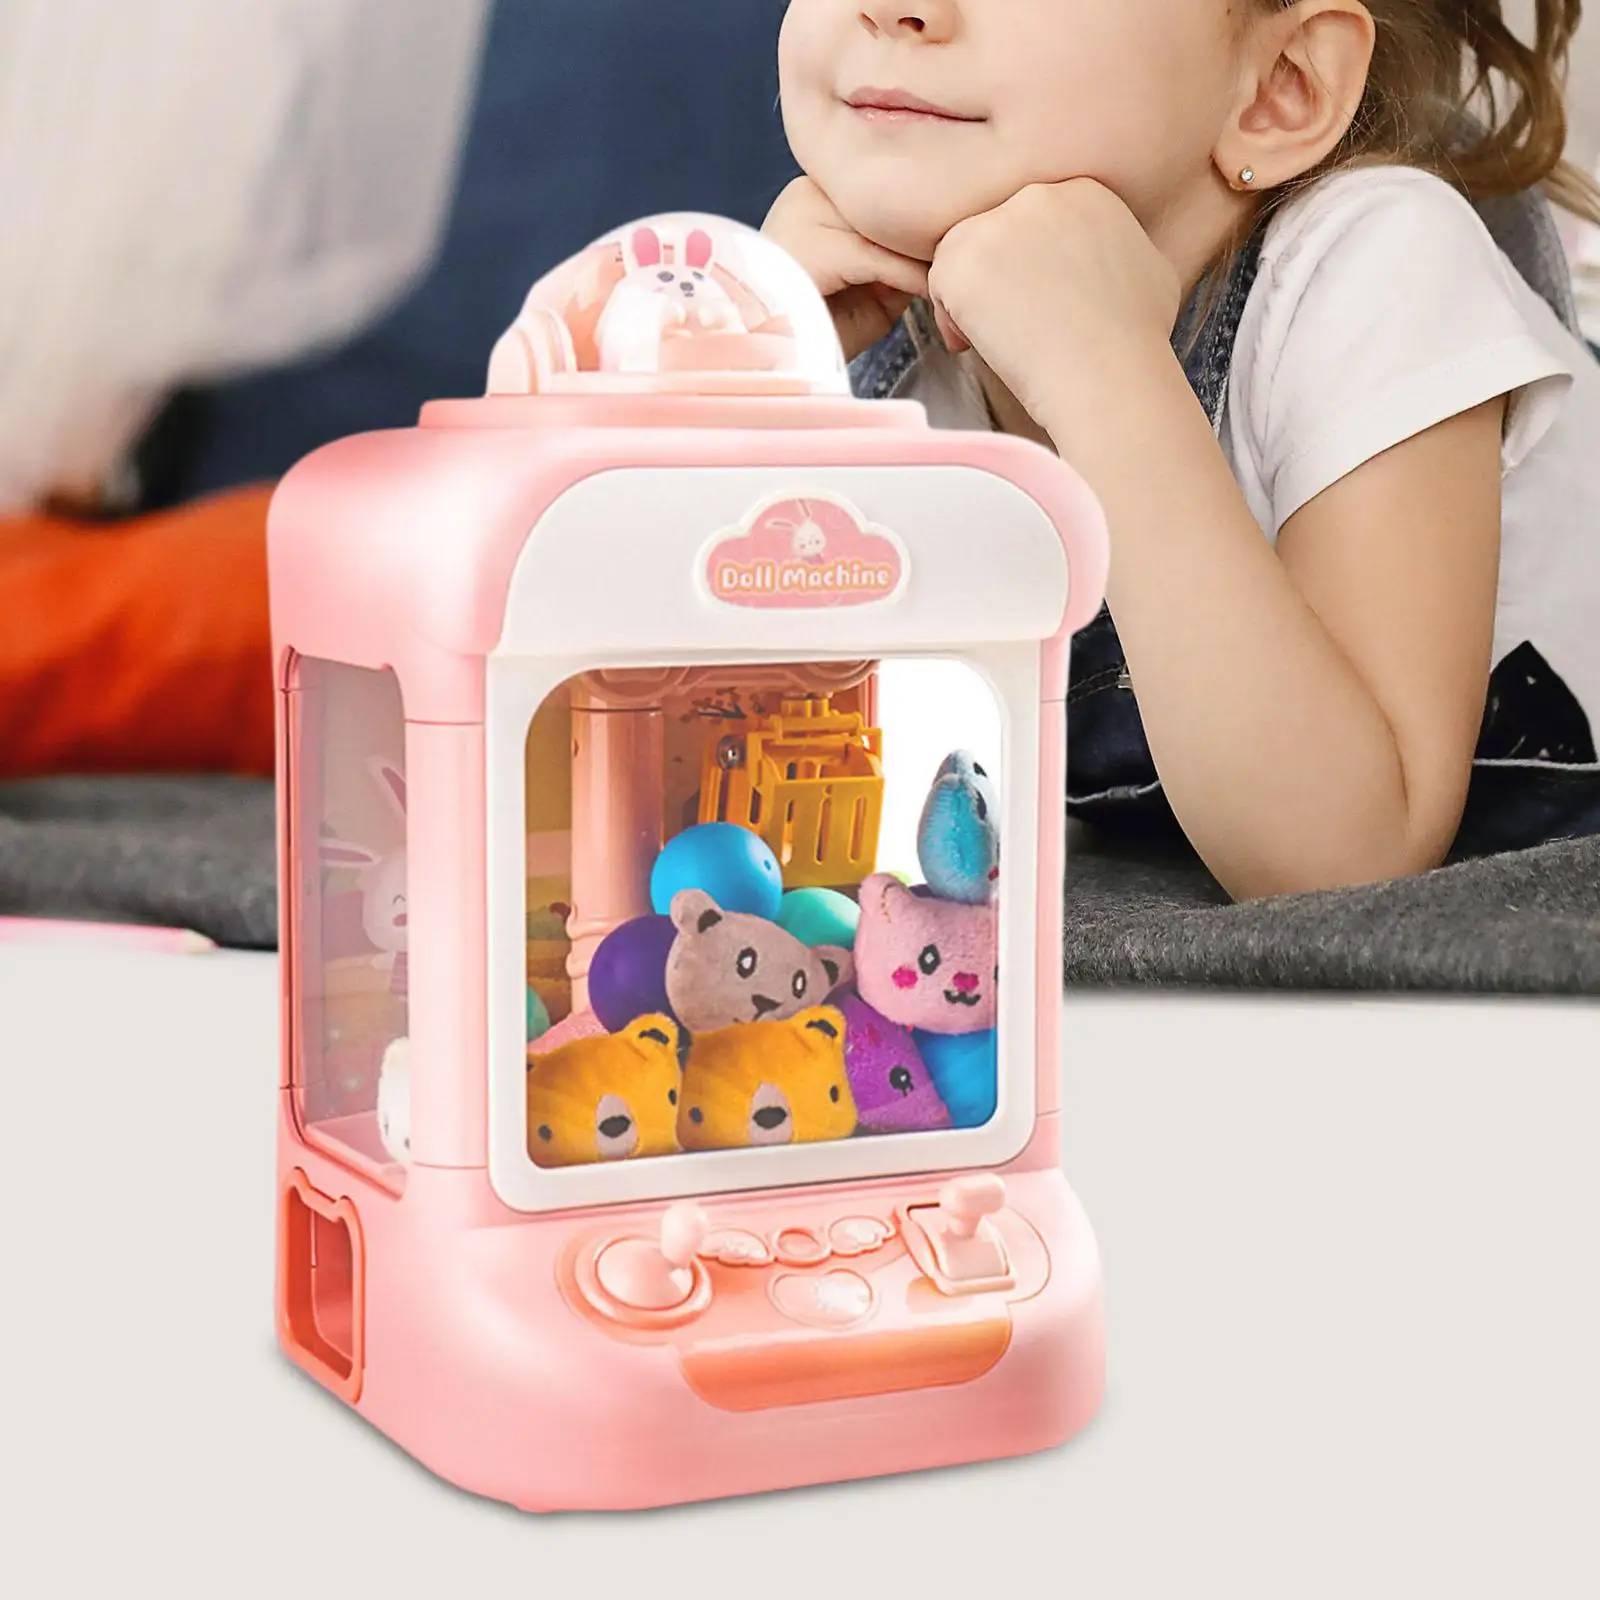 Manual Claw Machine Toy with Sounds Dolls Mini Arcade Machine for Children